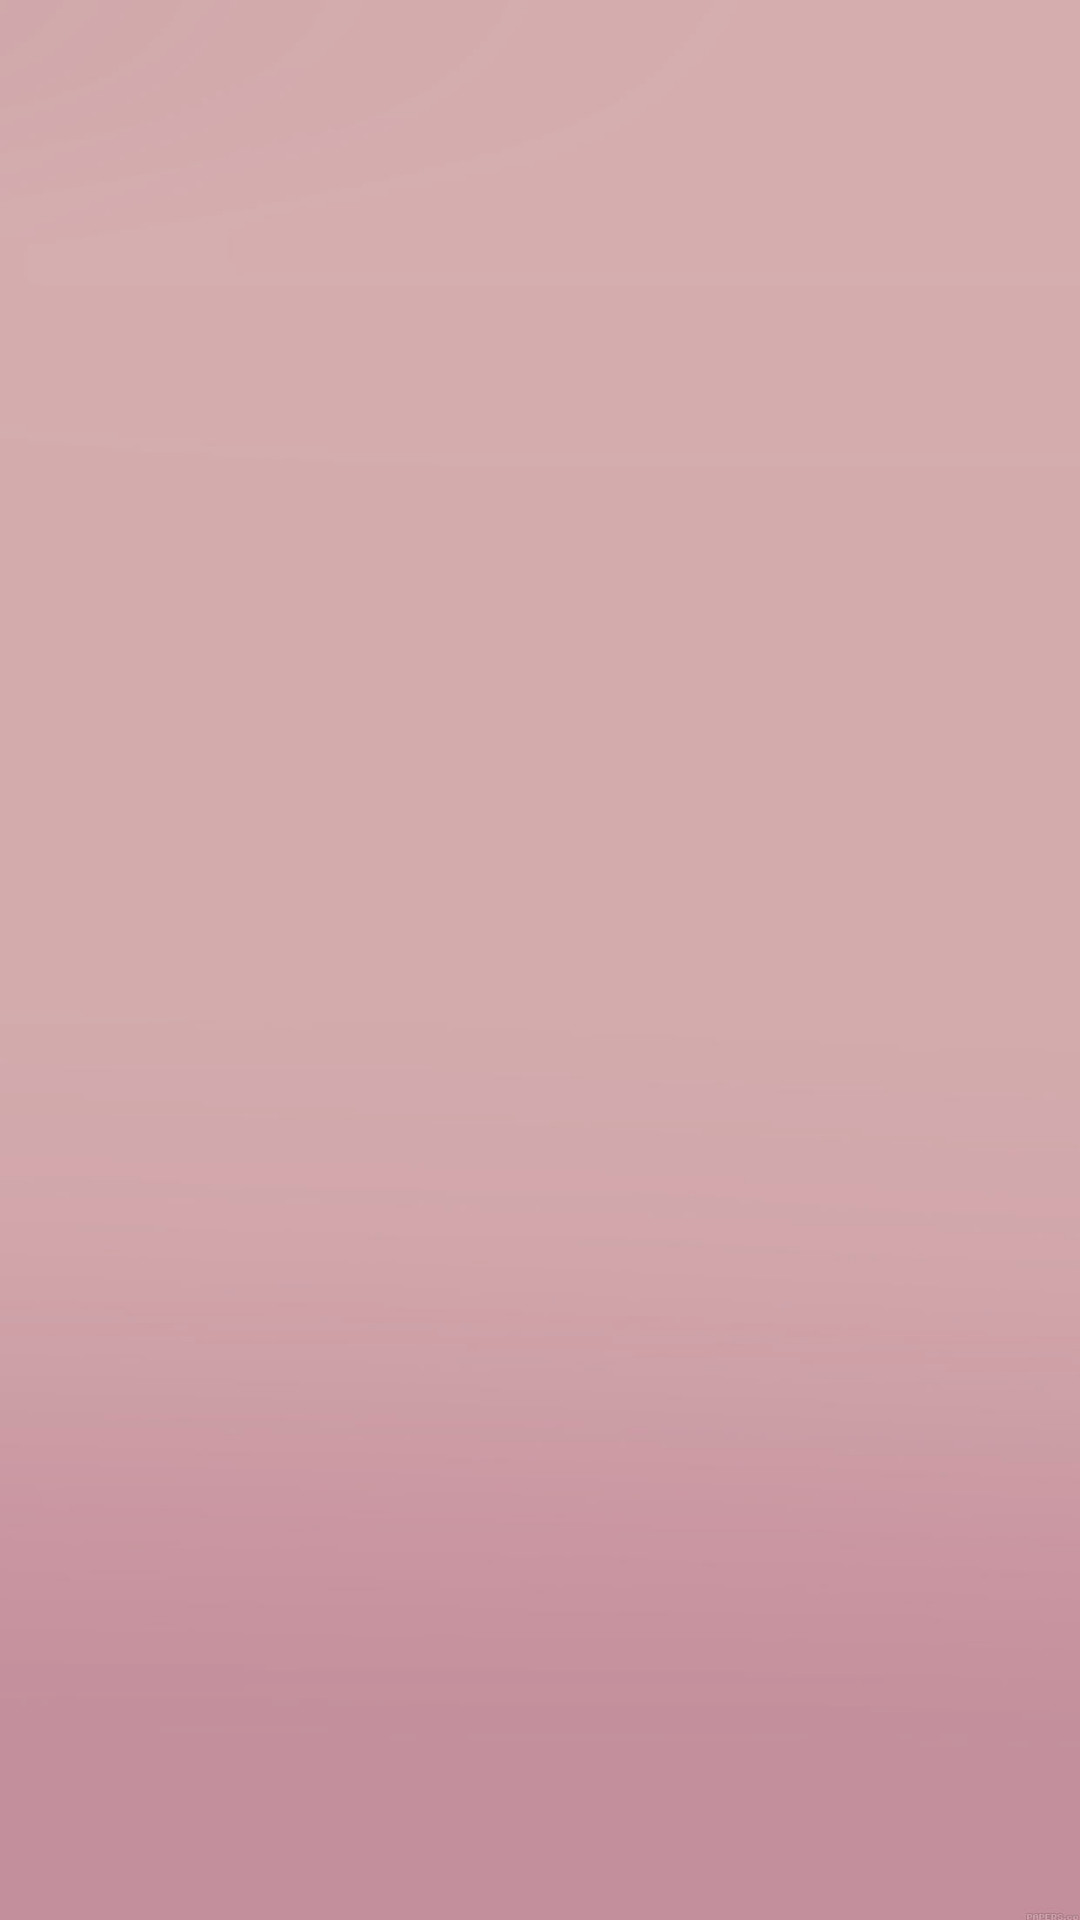 1080x1920 Pink and Plain Wallpaper